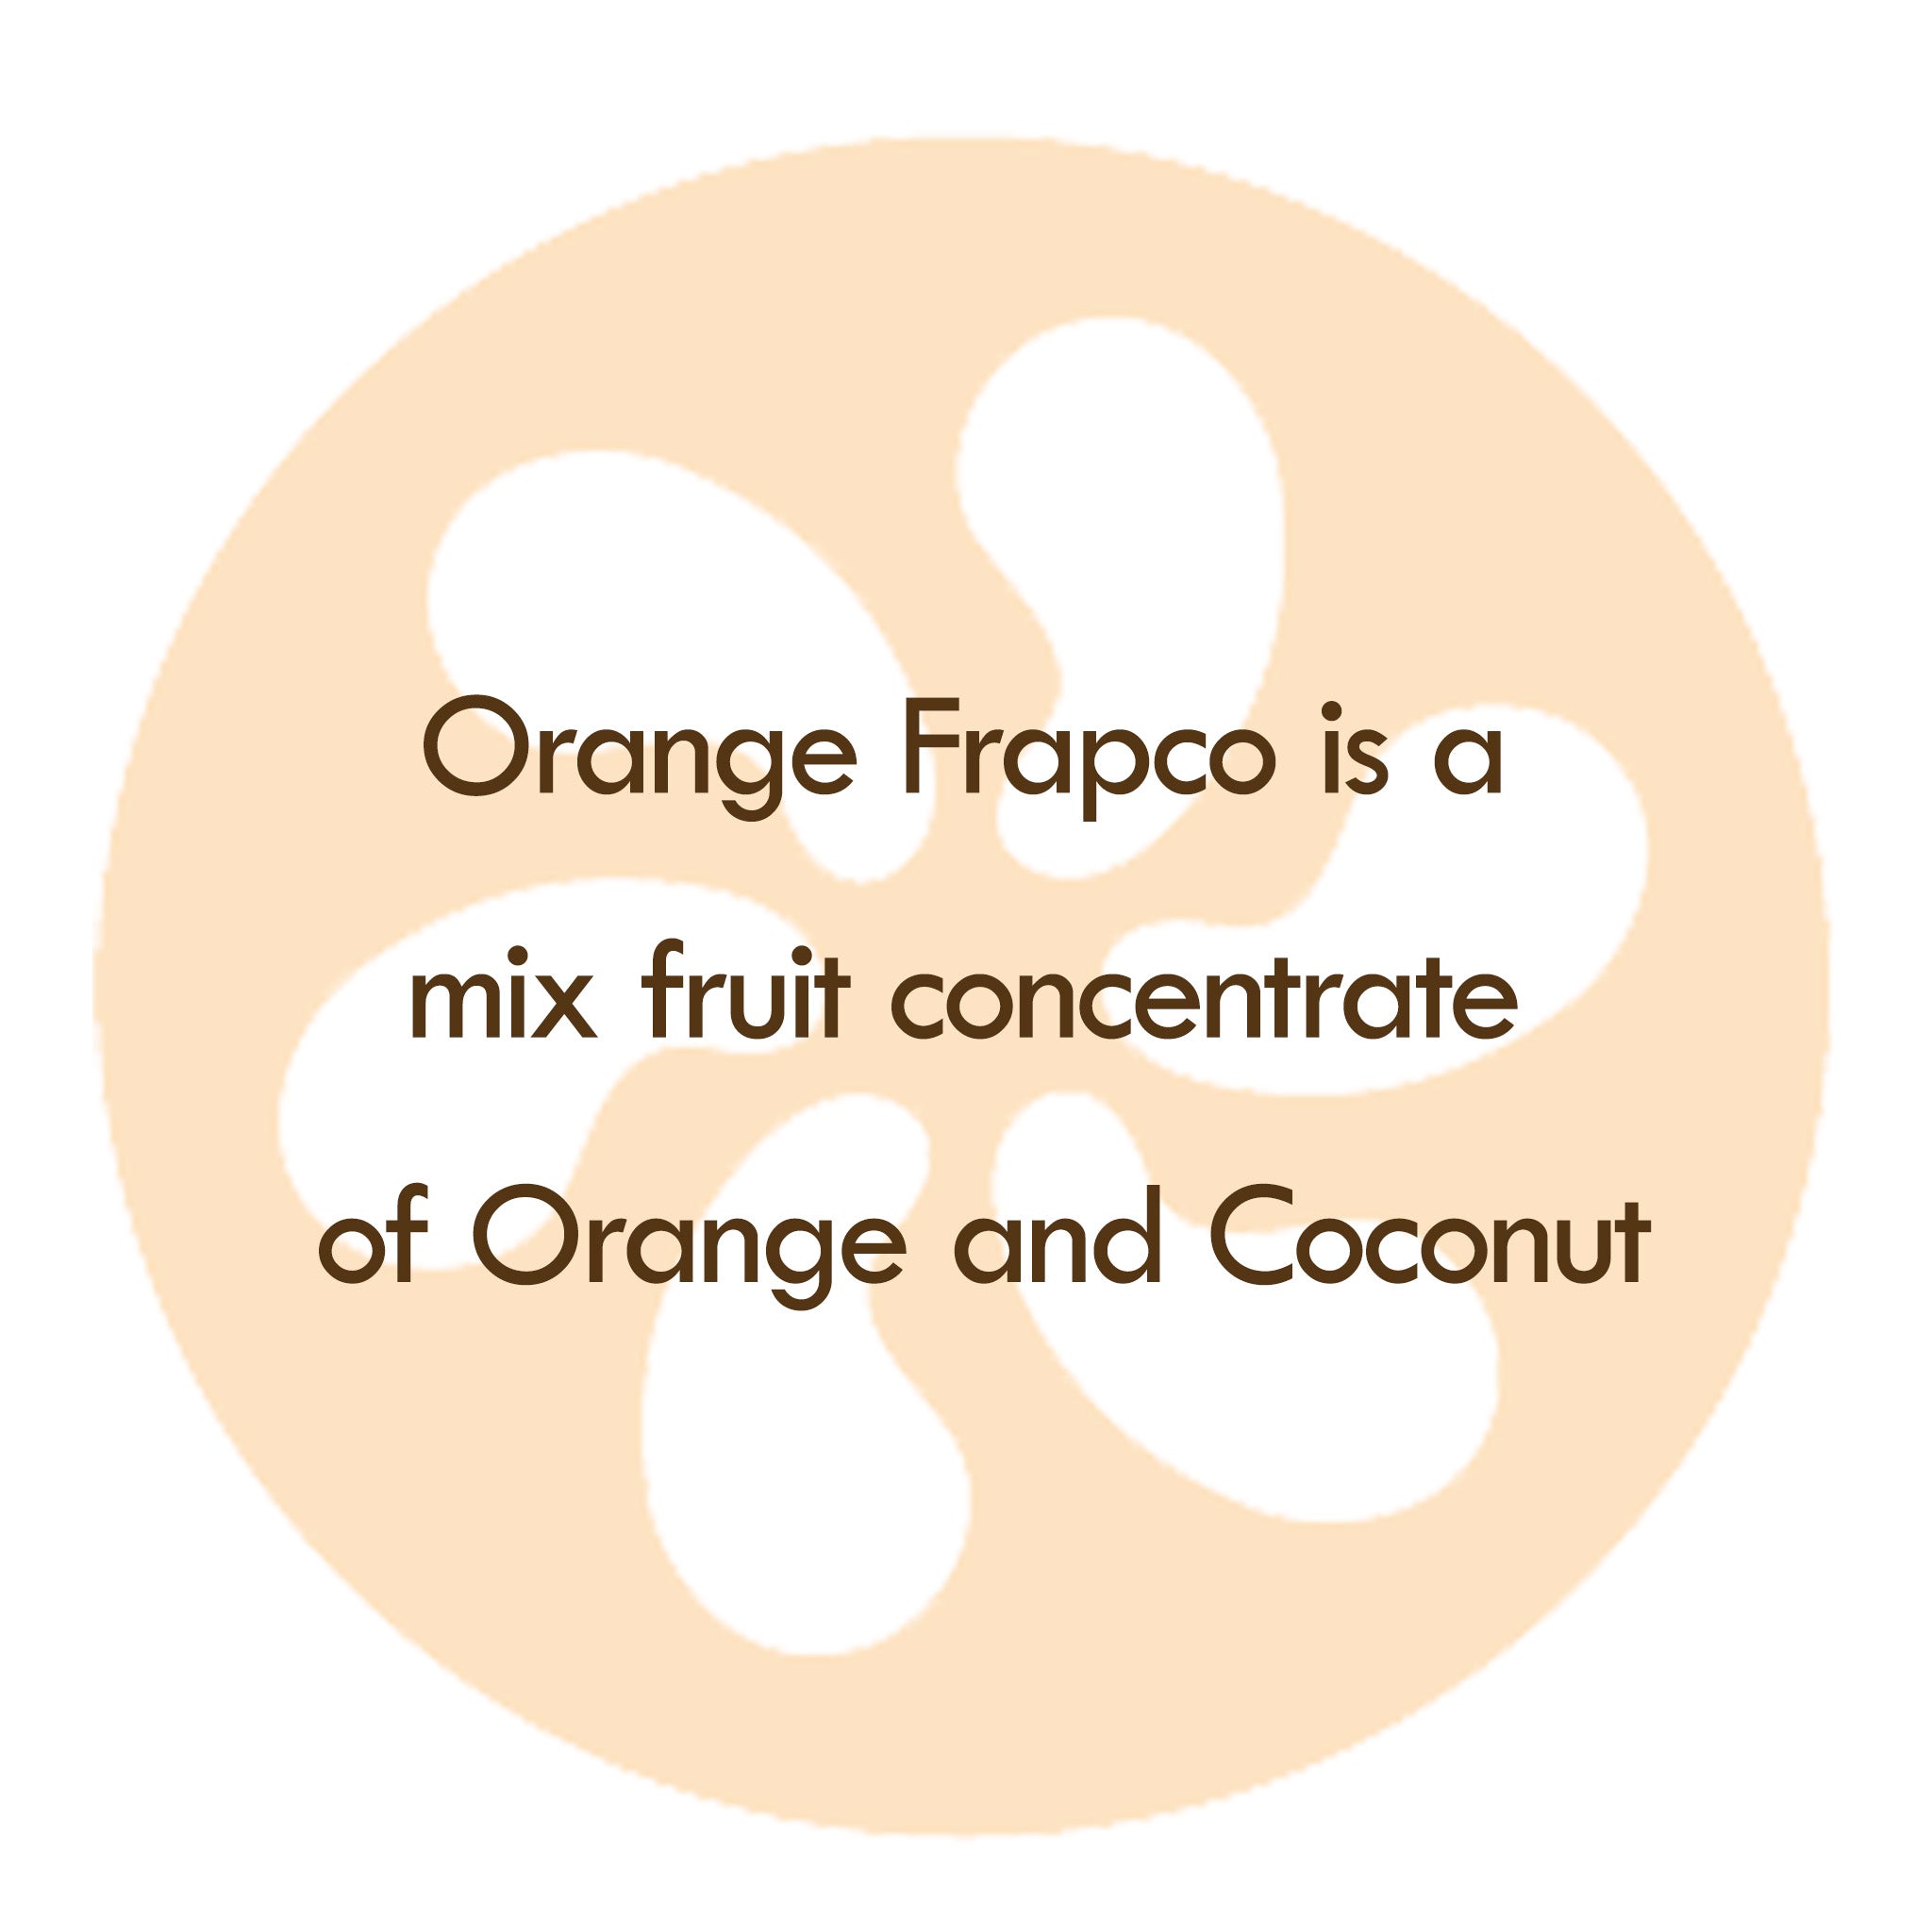 Our Orange Frappco Mocktail is a concentrate of Orange and Coconut.